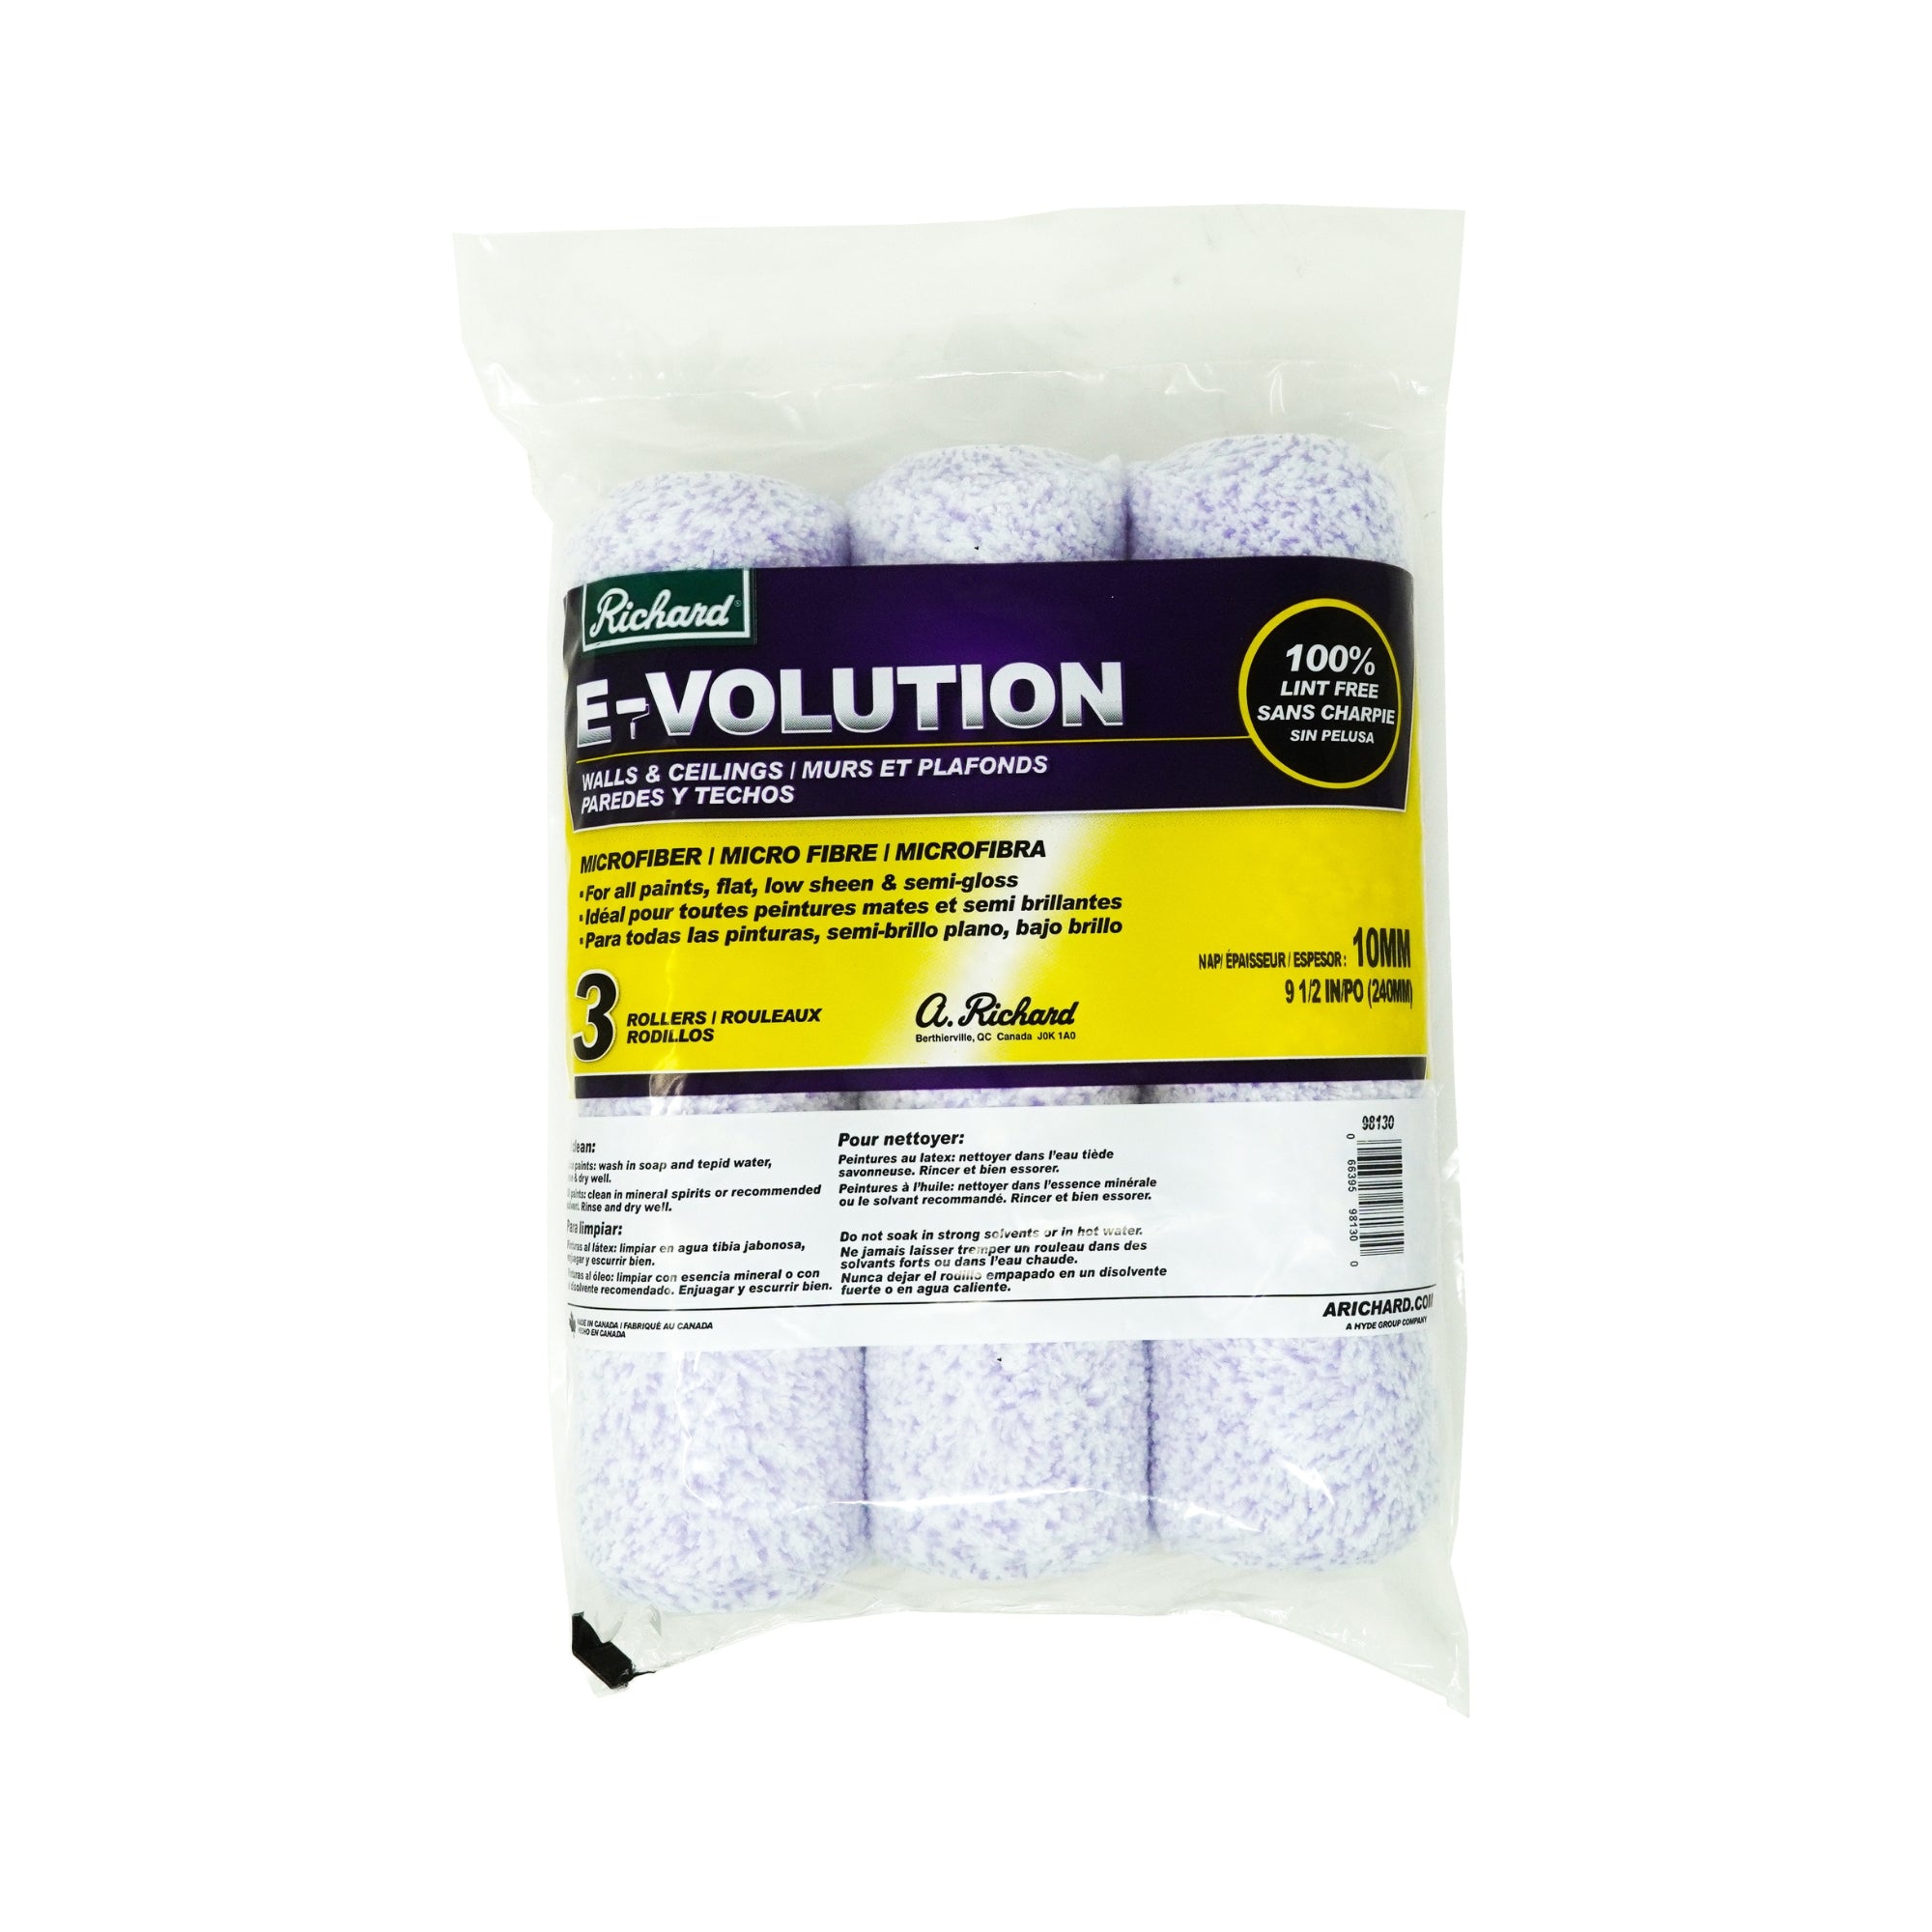 Richard 3-Pack 9 1/2" E-Volution Walls & Ceiling Rollers - 98130